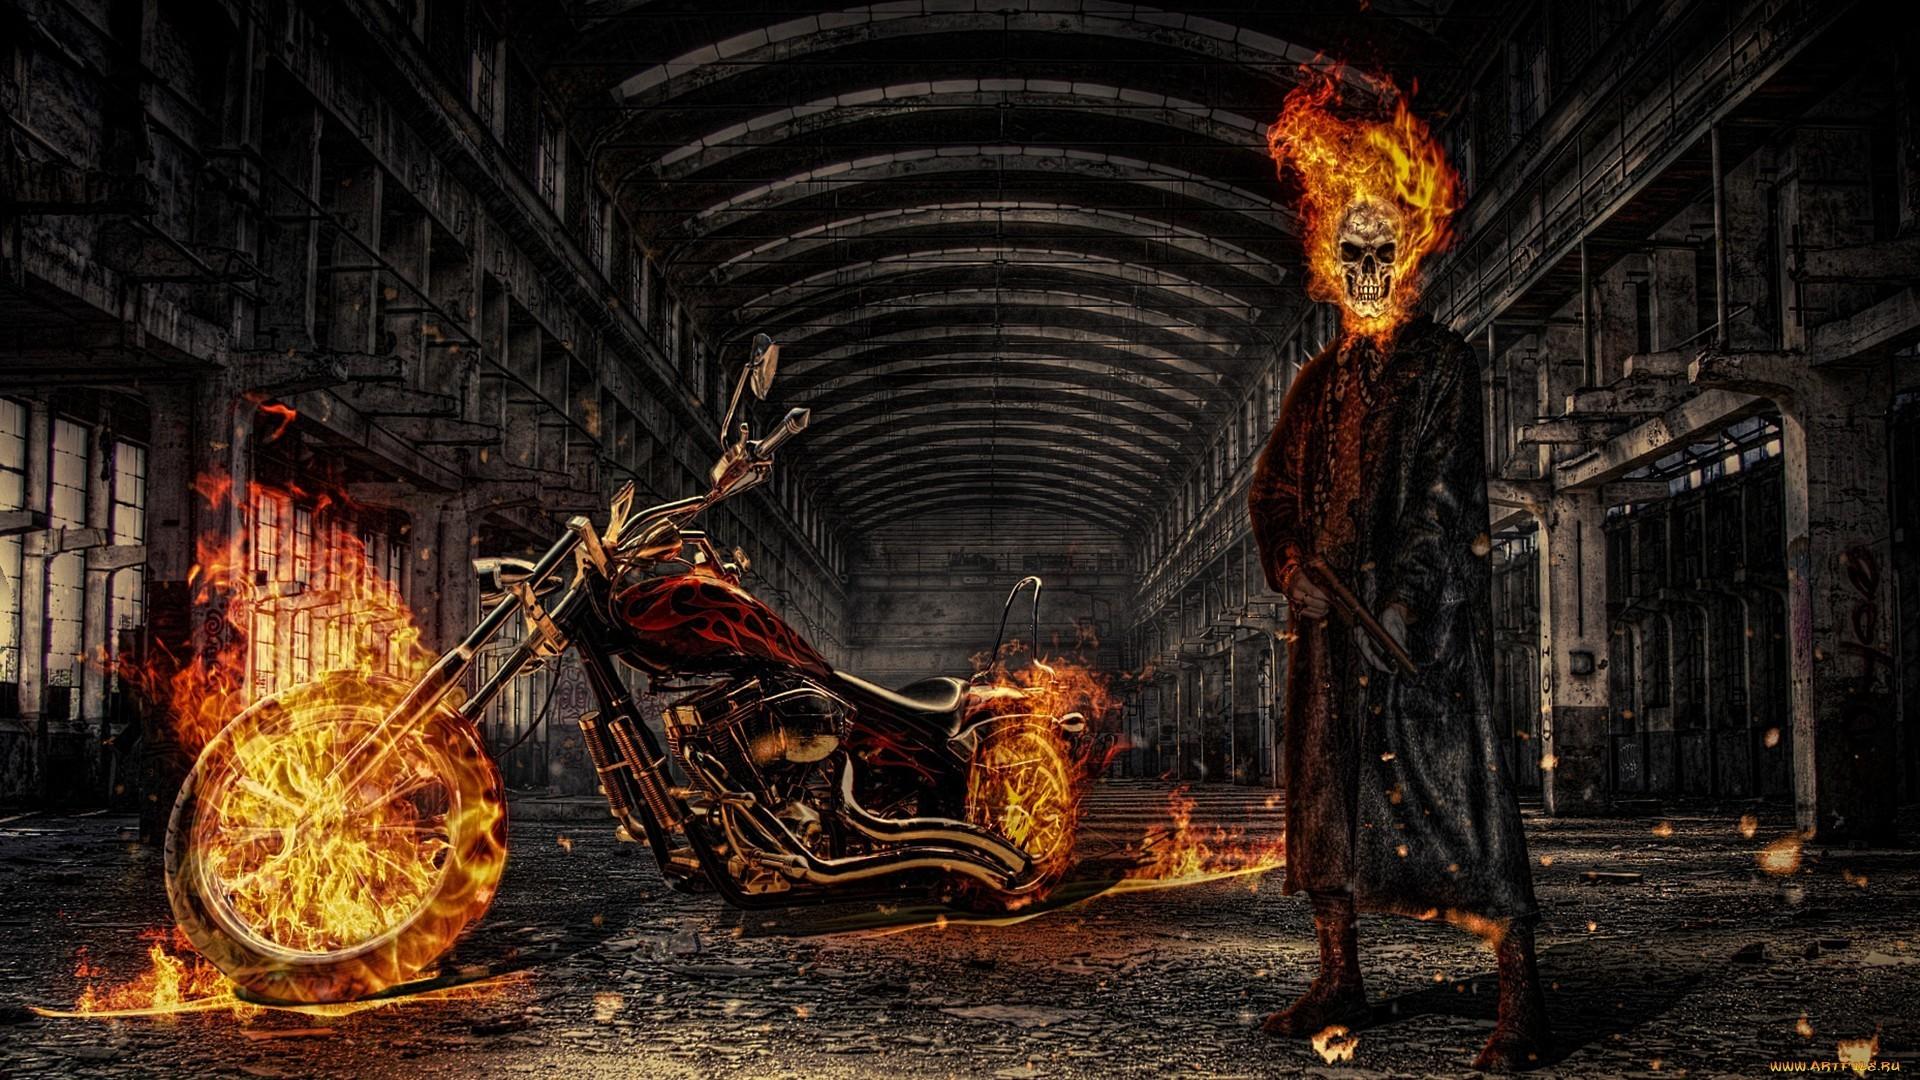 Free download Ghost rider wallpaper 62129 [1920x1080] for your Desktop, Mobile & Tablet. Explore Ghost Rider Desktop Wallpaper. Ghost Rider Wallpaper, Ghost Rider iPhone Wallpaper, Blue Ghost Rider Wallpaper